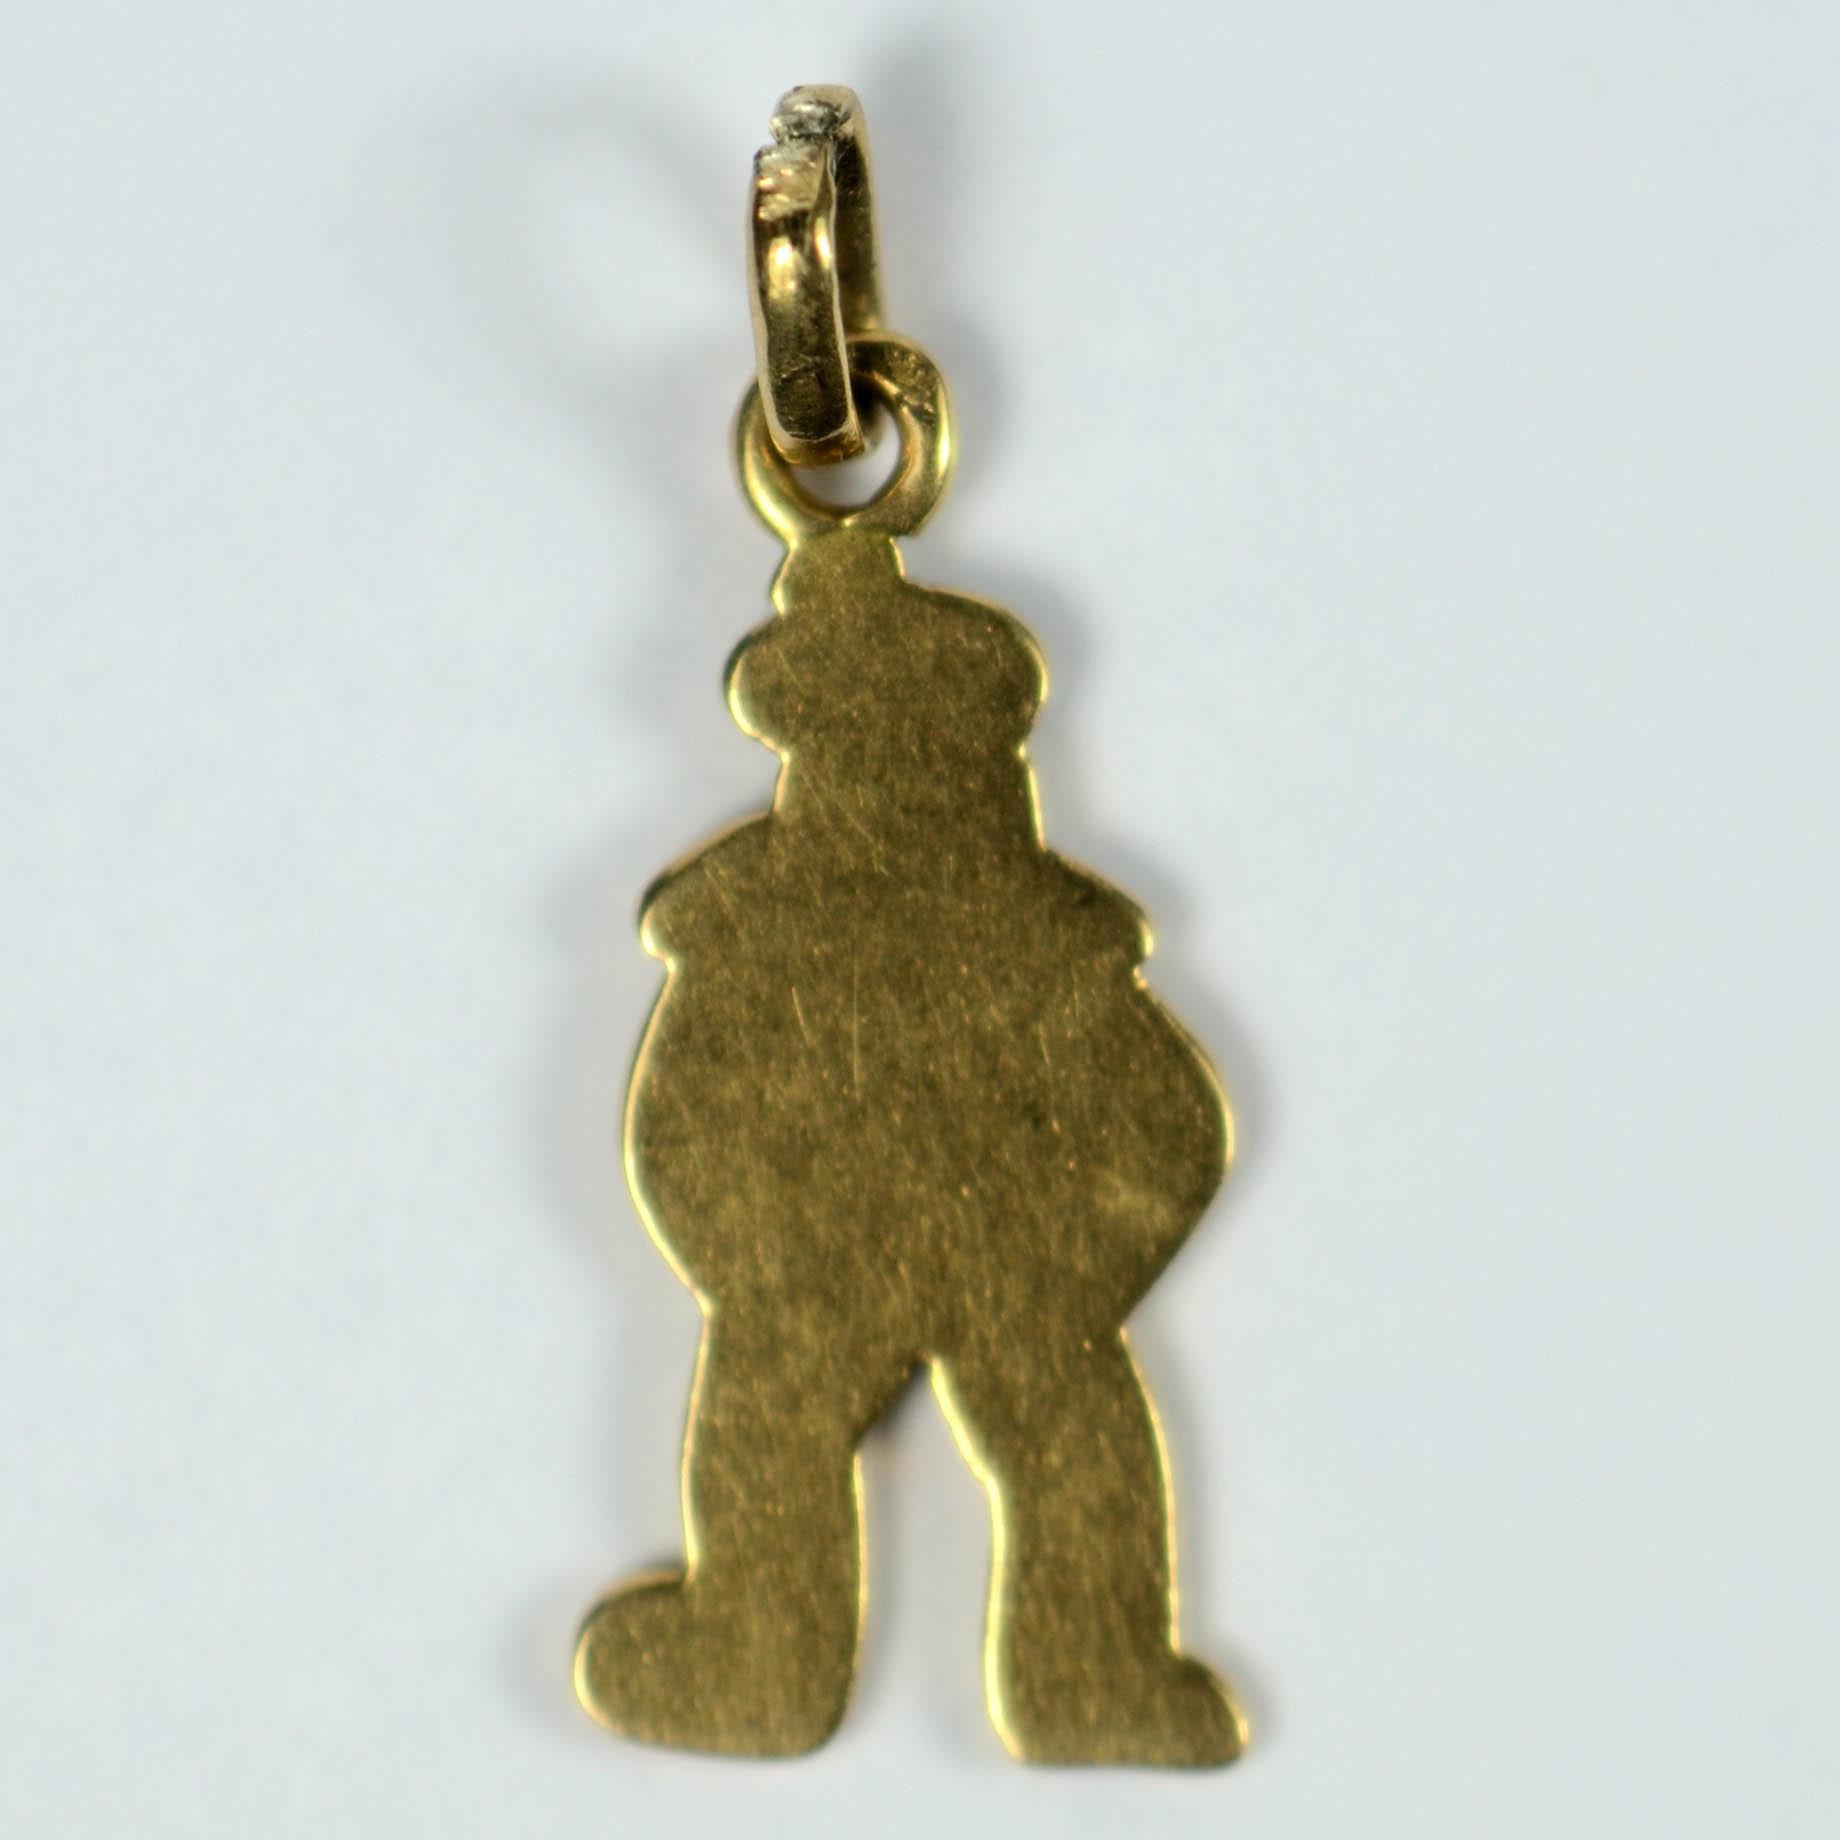 A French Art Deco charm designed as a sailor in enamel on 18 karat gold. Stamped with the eagle's head for Parisian manufacture. 3/4